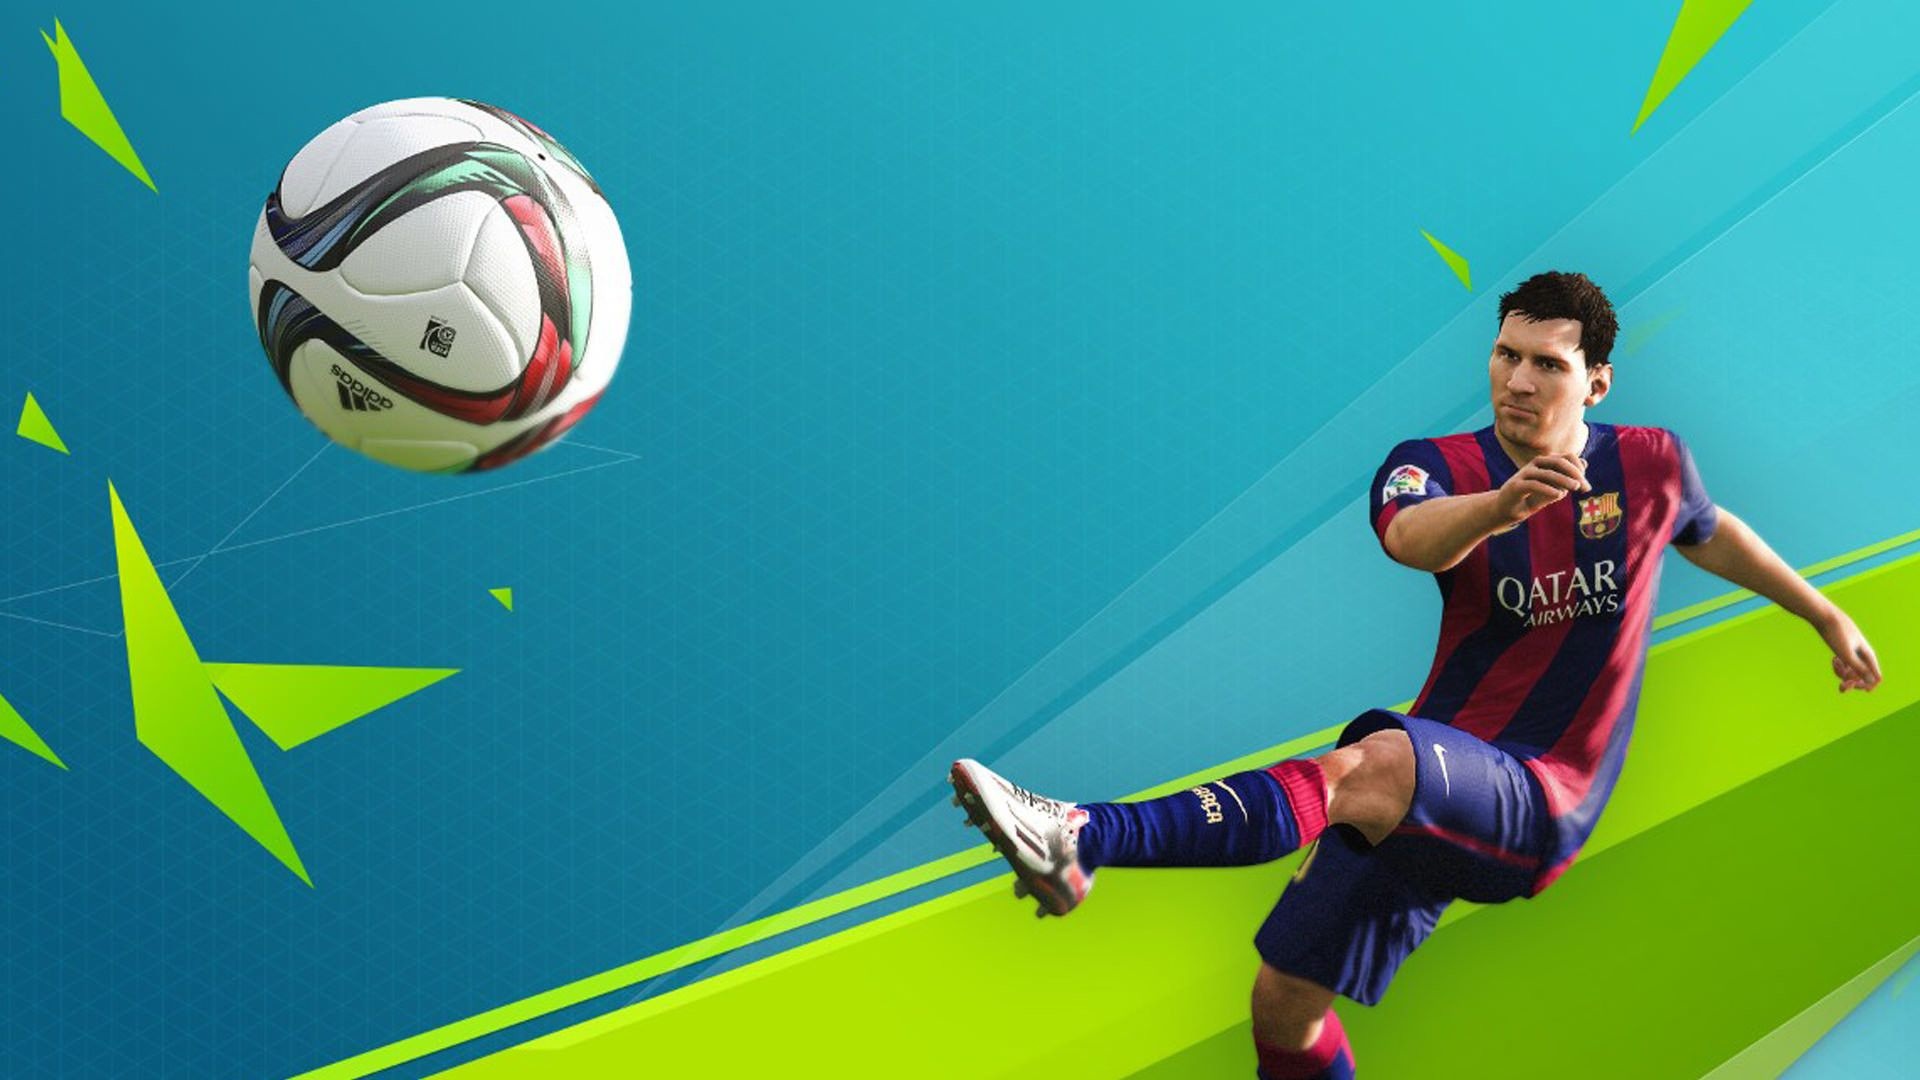 FIFA Soccer (Game): Ultimate Team, The much-awaited annual installment, EA Canada. 1920x1080 Full HD Background.